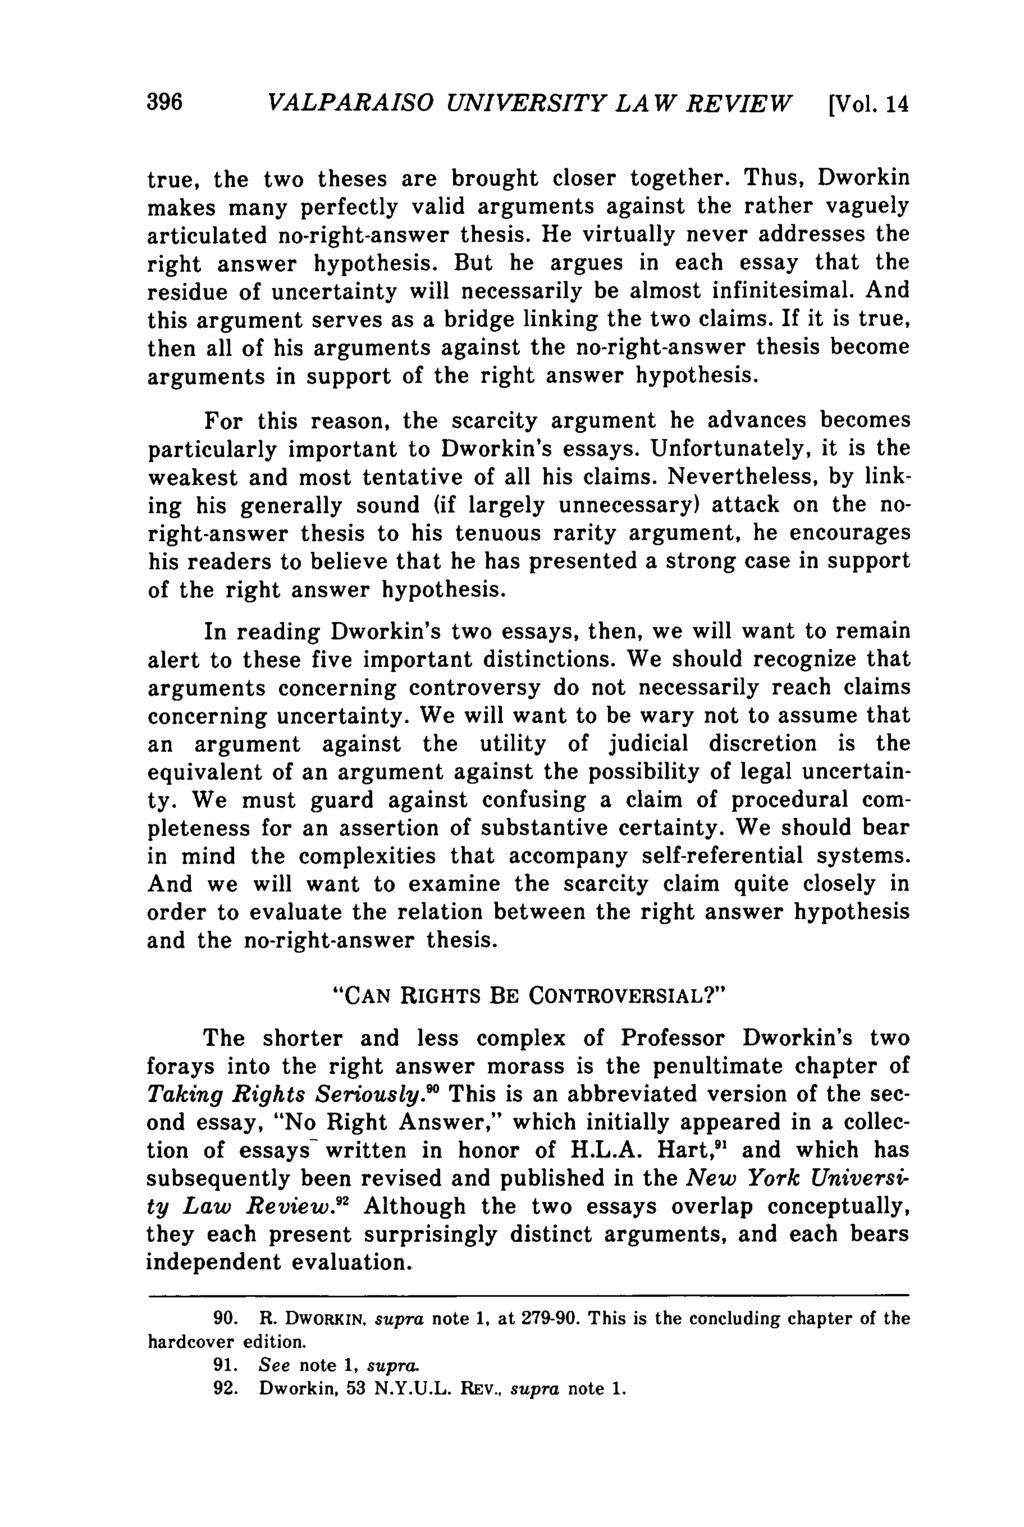 Valparaiso University Law Review, Vol. 14, No. 3 [1980], Art. 1 396 VALPARAISO UNIVERSITY LA W REVIEW [Vol. 14 true, the two theses are brought closer together.